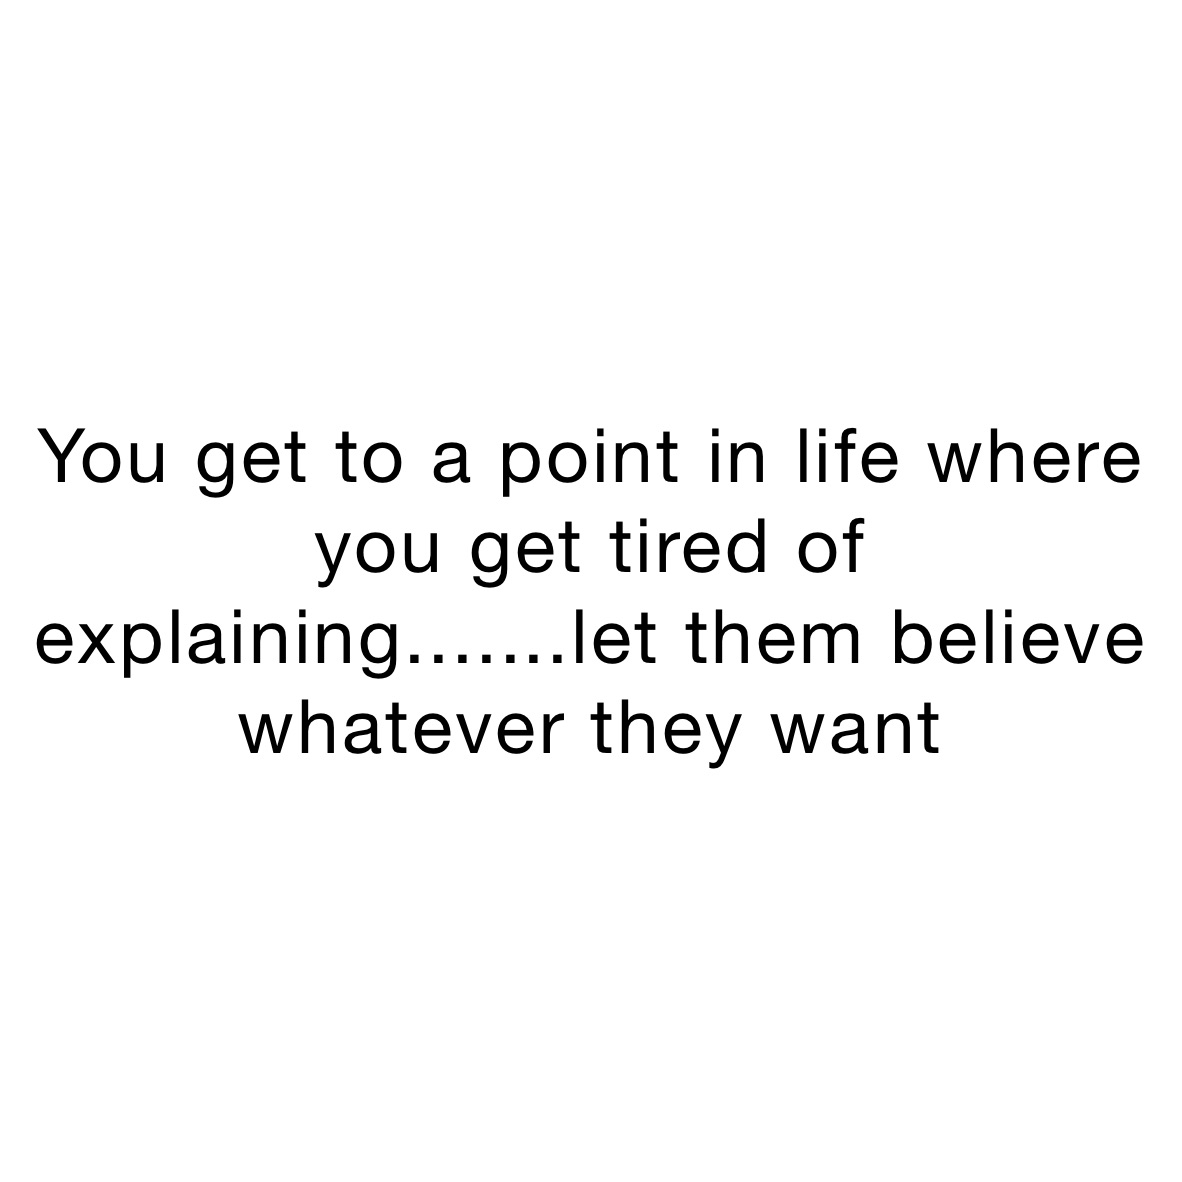 You get to a point in life where you get tired of explaining.......let them believe whatever they want